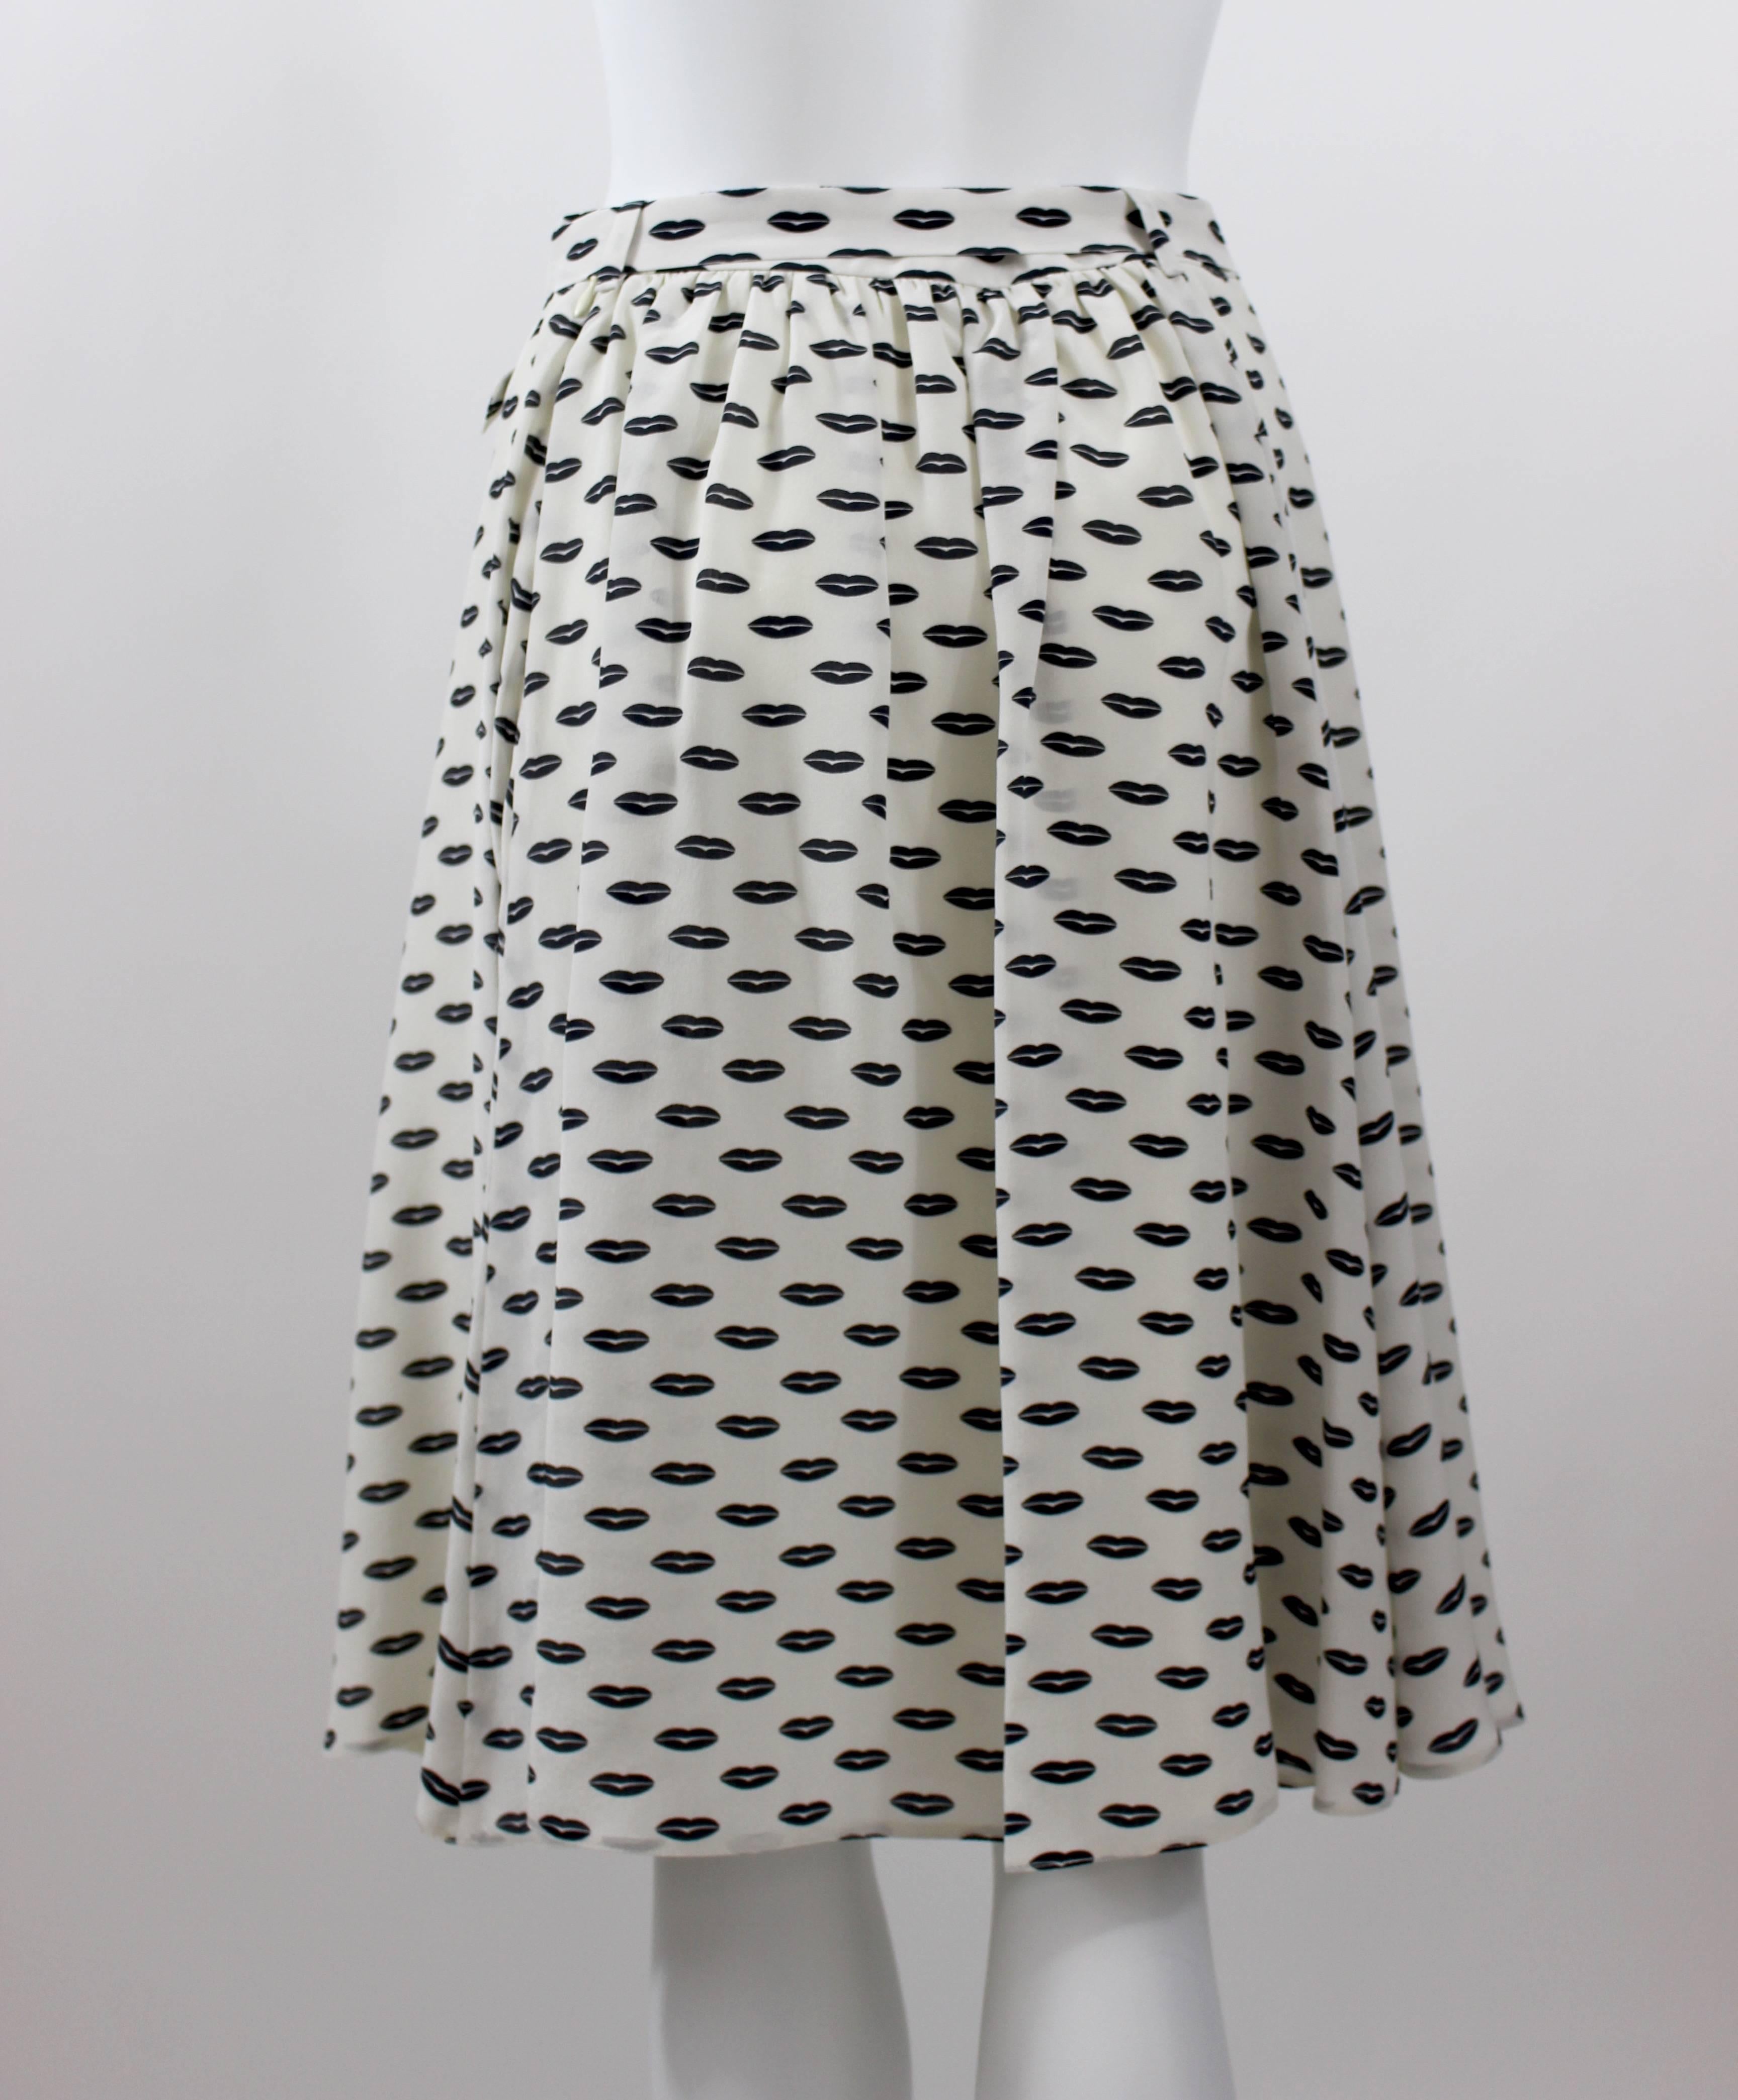 Prada Kissing Lips Resort Collection Silk Skirt, 2012 In Excellent Condition For Sale In Boca Raton, FL